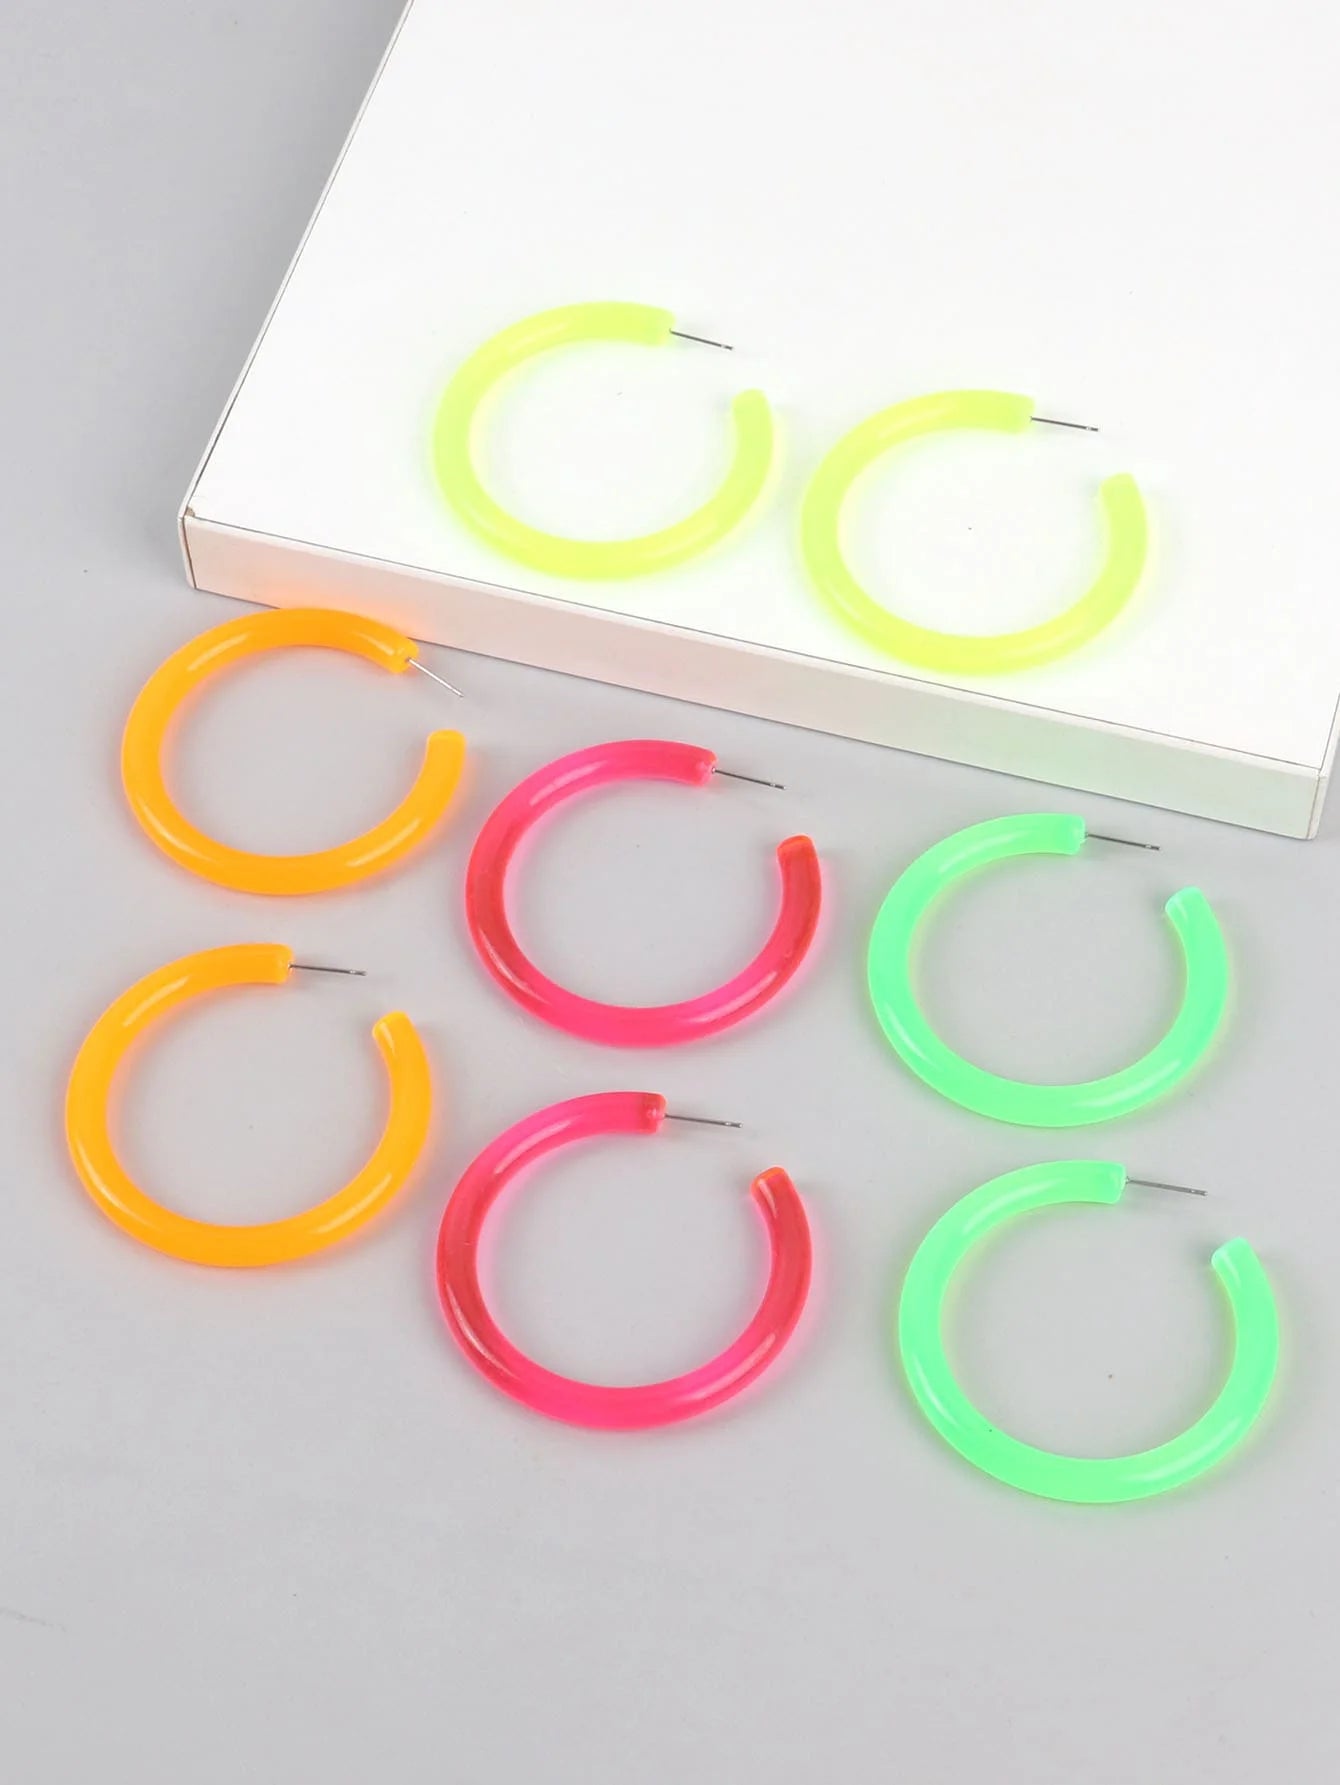 4Pairs/Set Neon Color Acrylic Hoop Earrings Set for Women Rock Punk Fluorescent Large Round Hoops Earring Party Jewelry Gifts